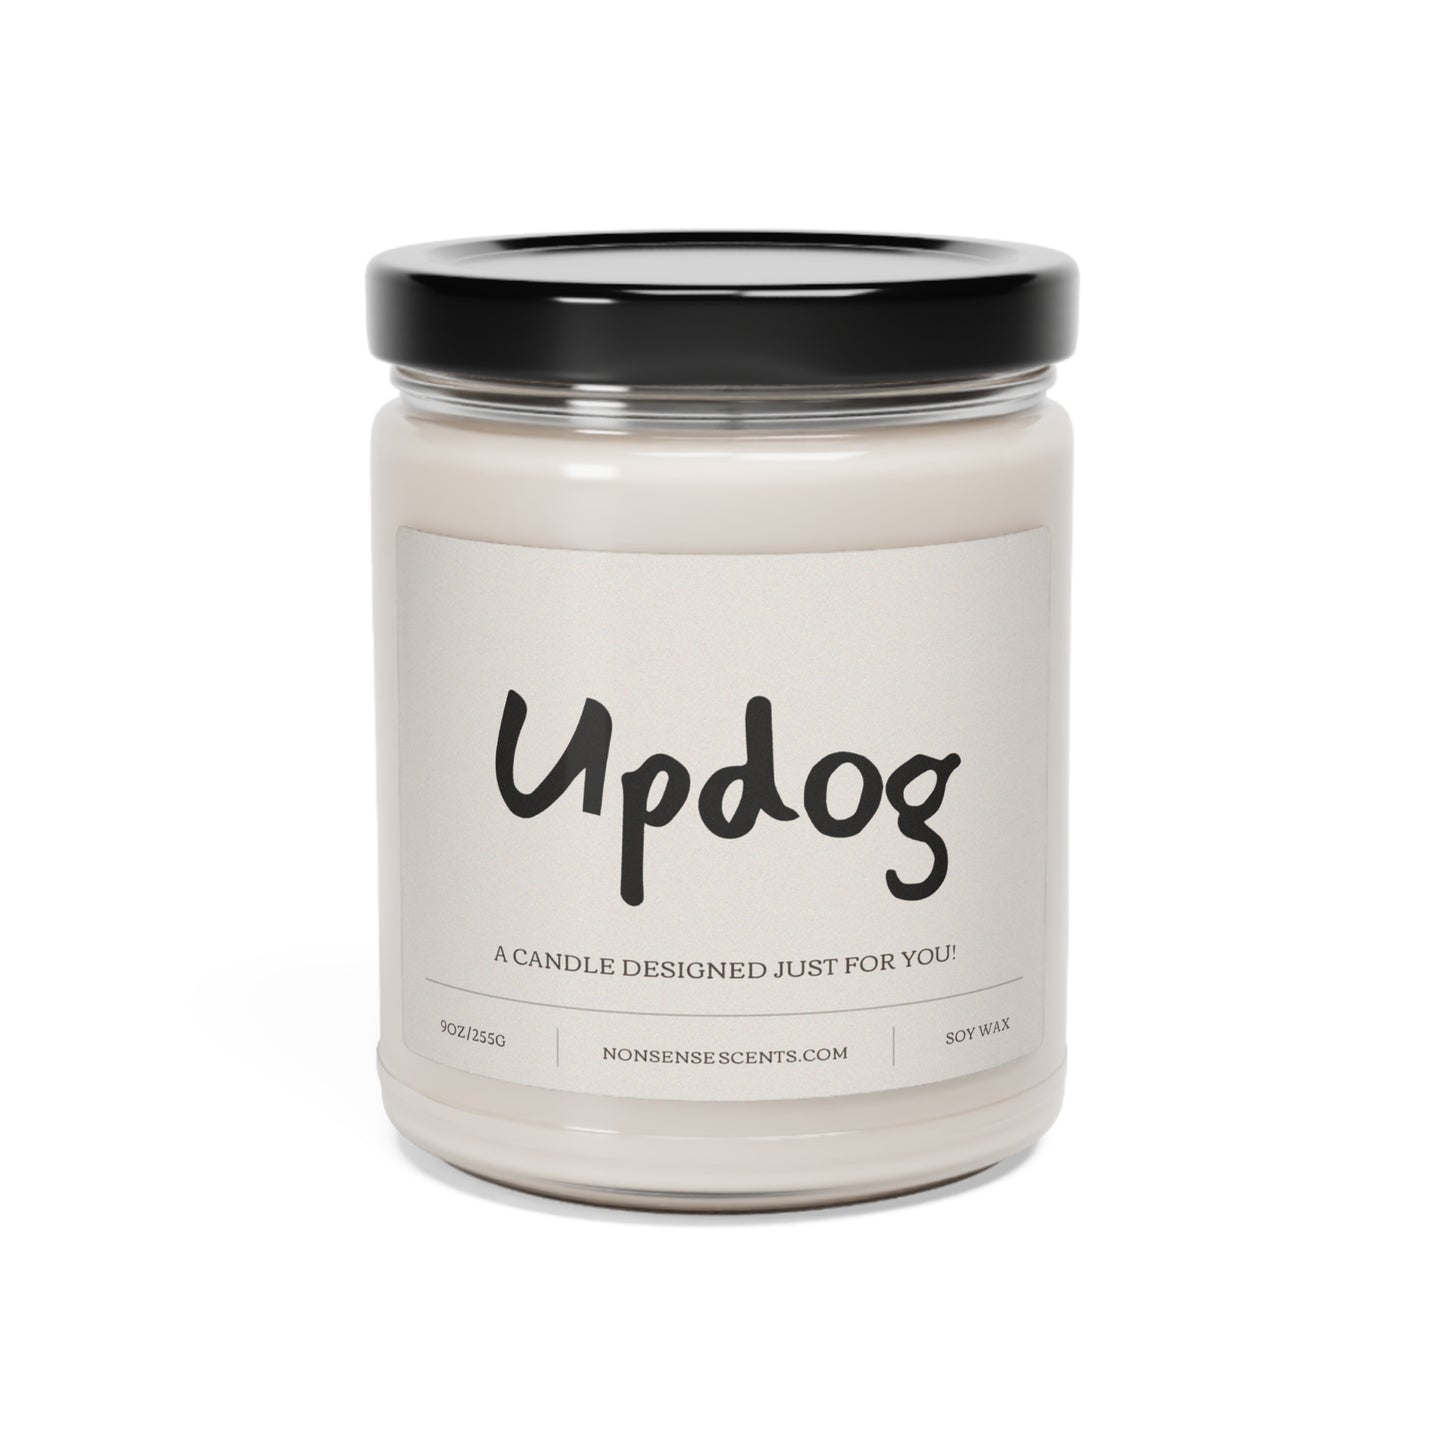 "Updog" Scented Candle